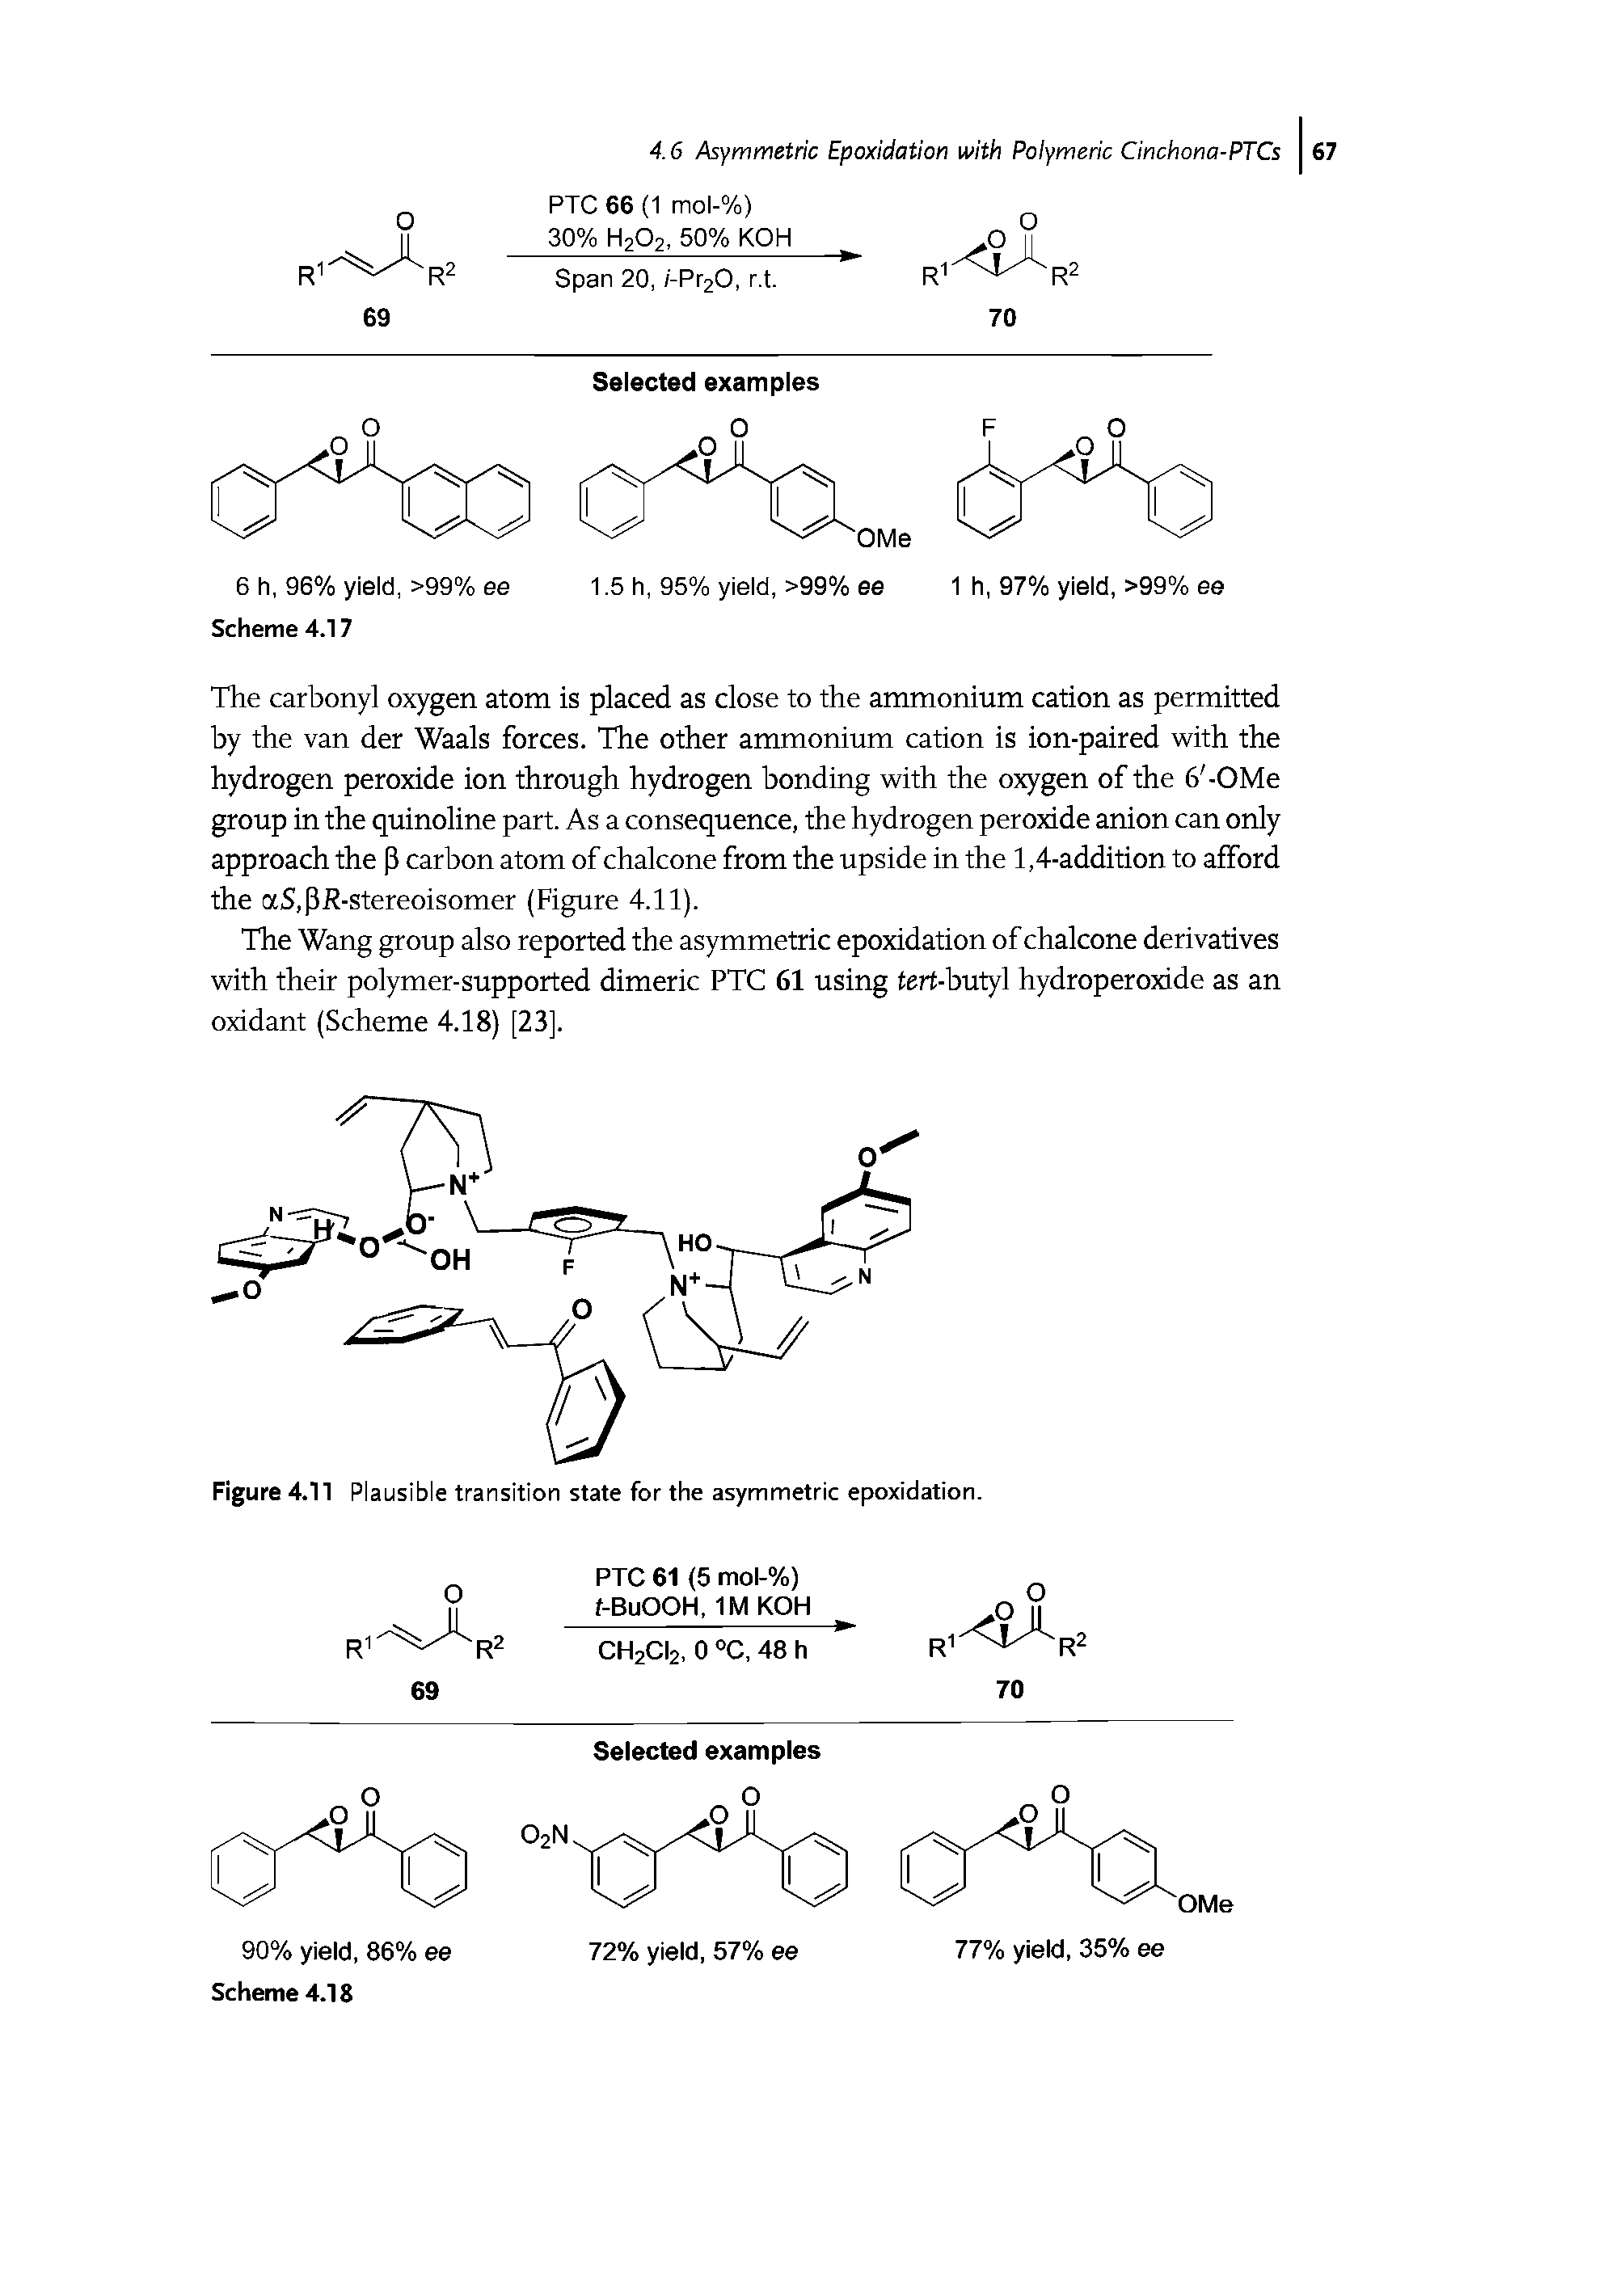 Figure 4.11 Plausible transition state for the asymmetric epoxidation.